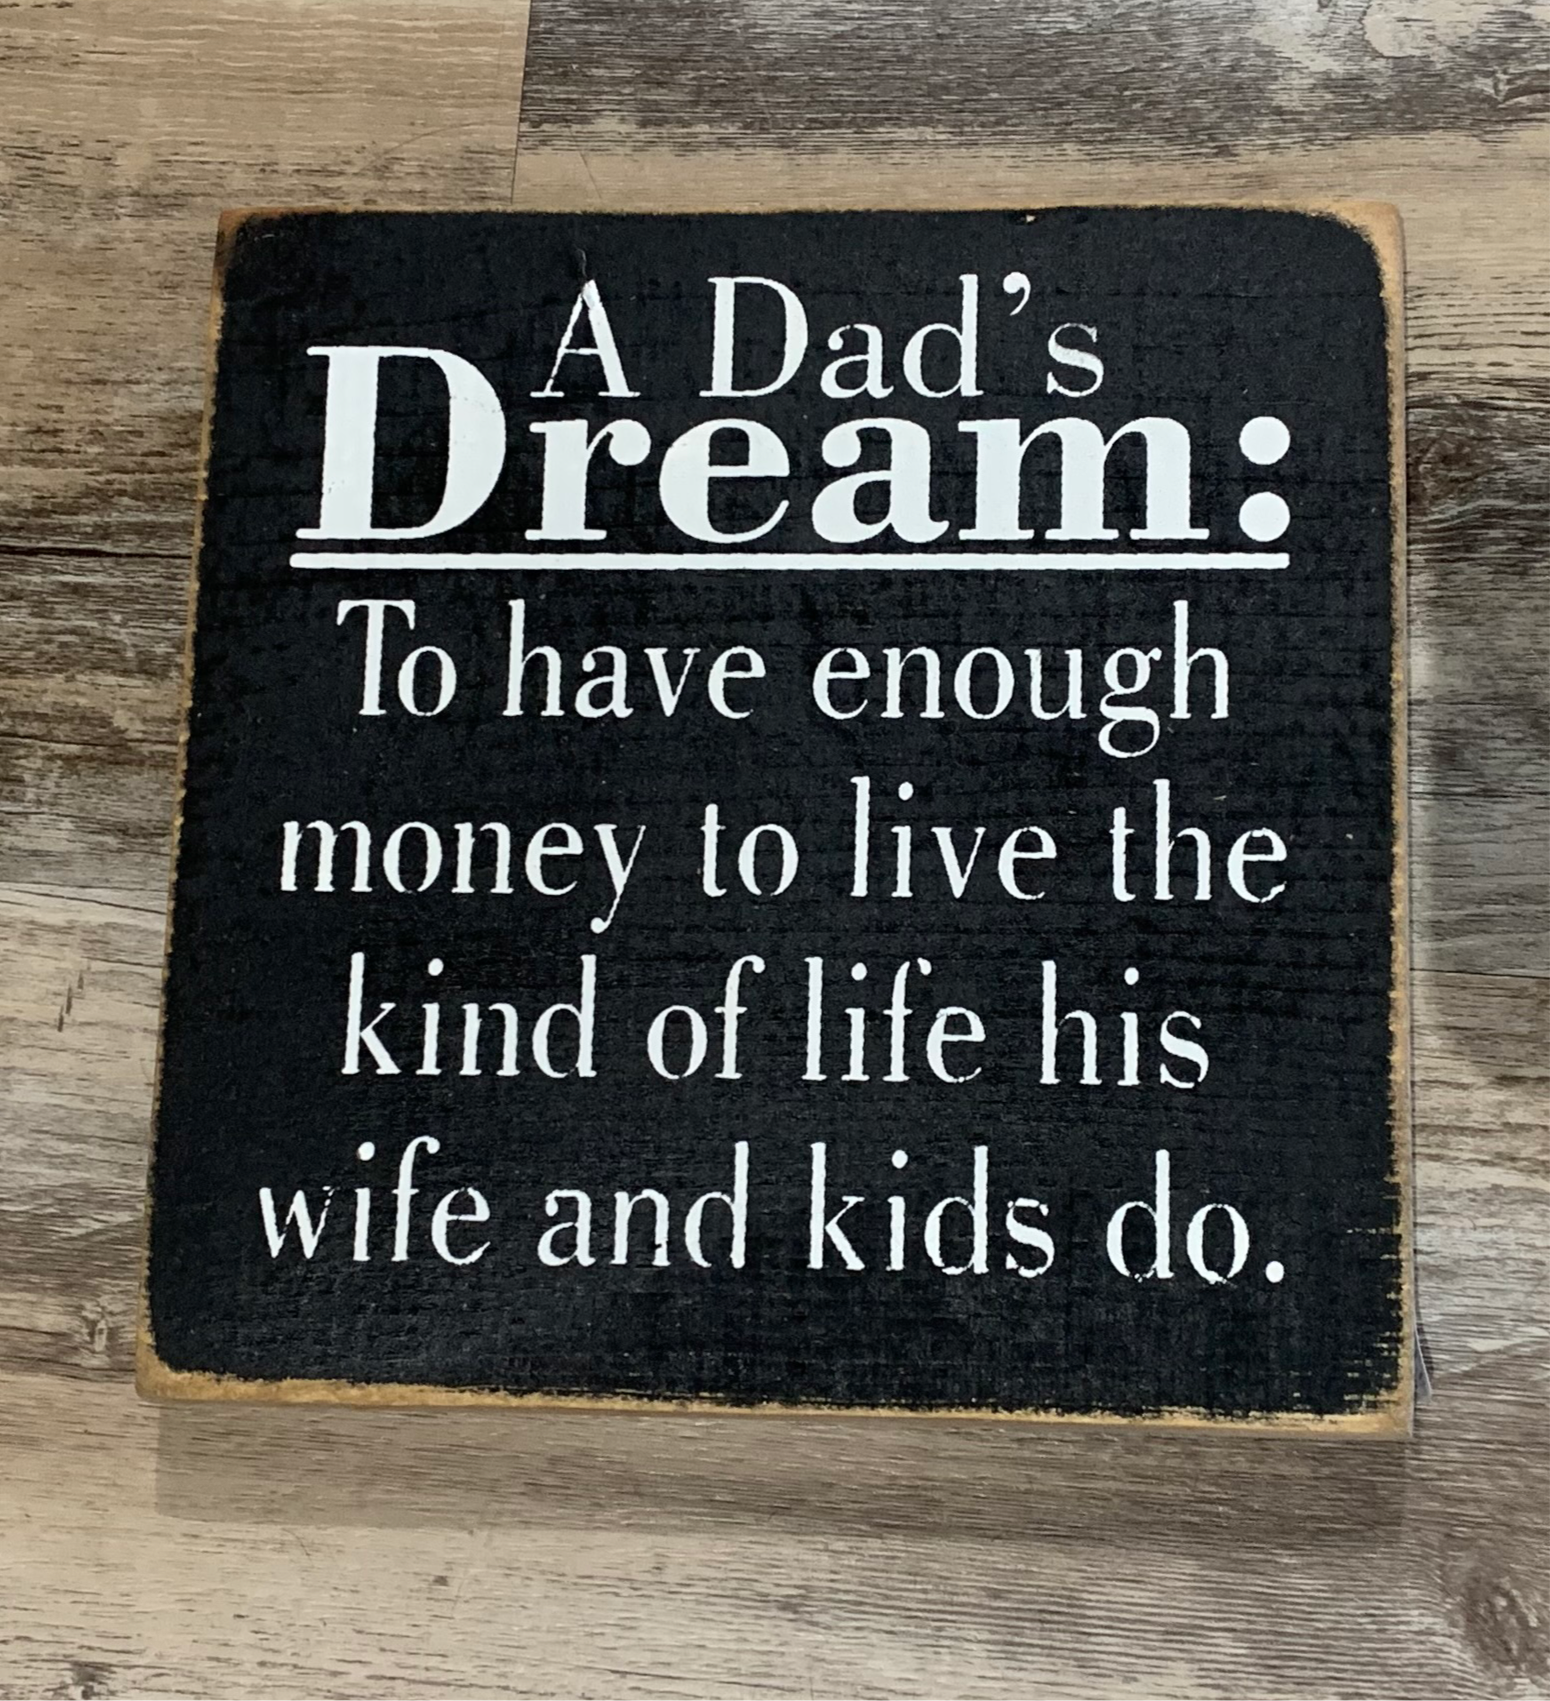 A Dad's Dream: To have enough money...-wood sign